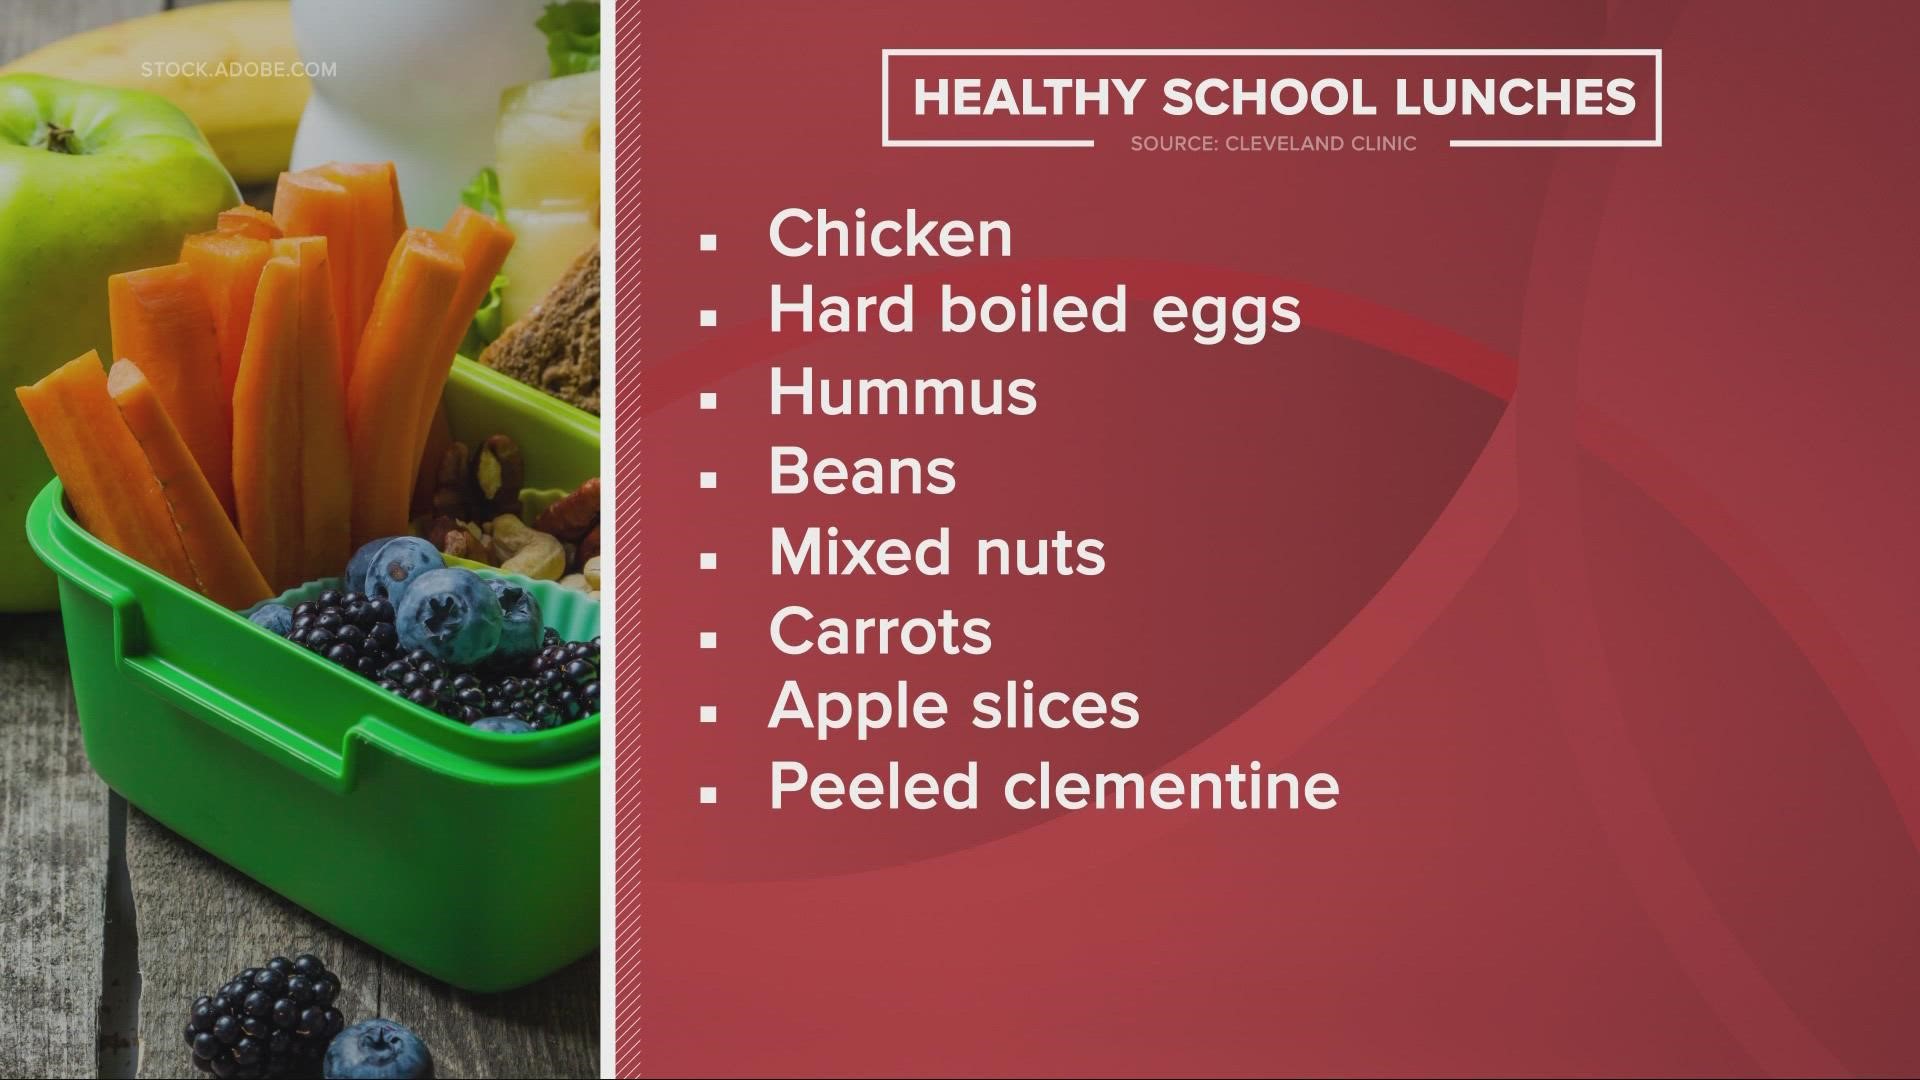 3News' Danielle Wiggins talks with the experts about how to make sure your kids are getting the foods they need in school lunch.